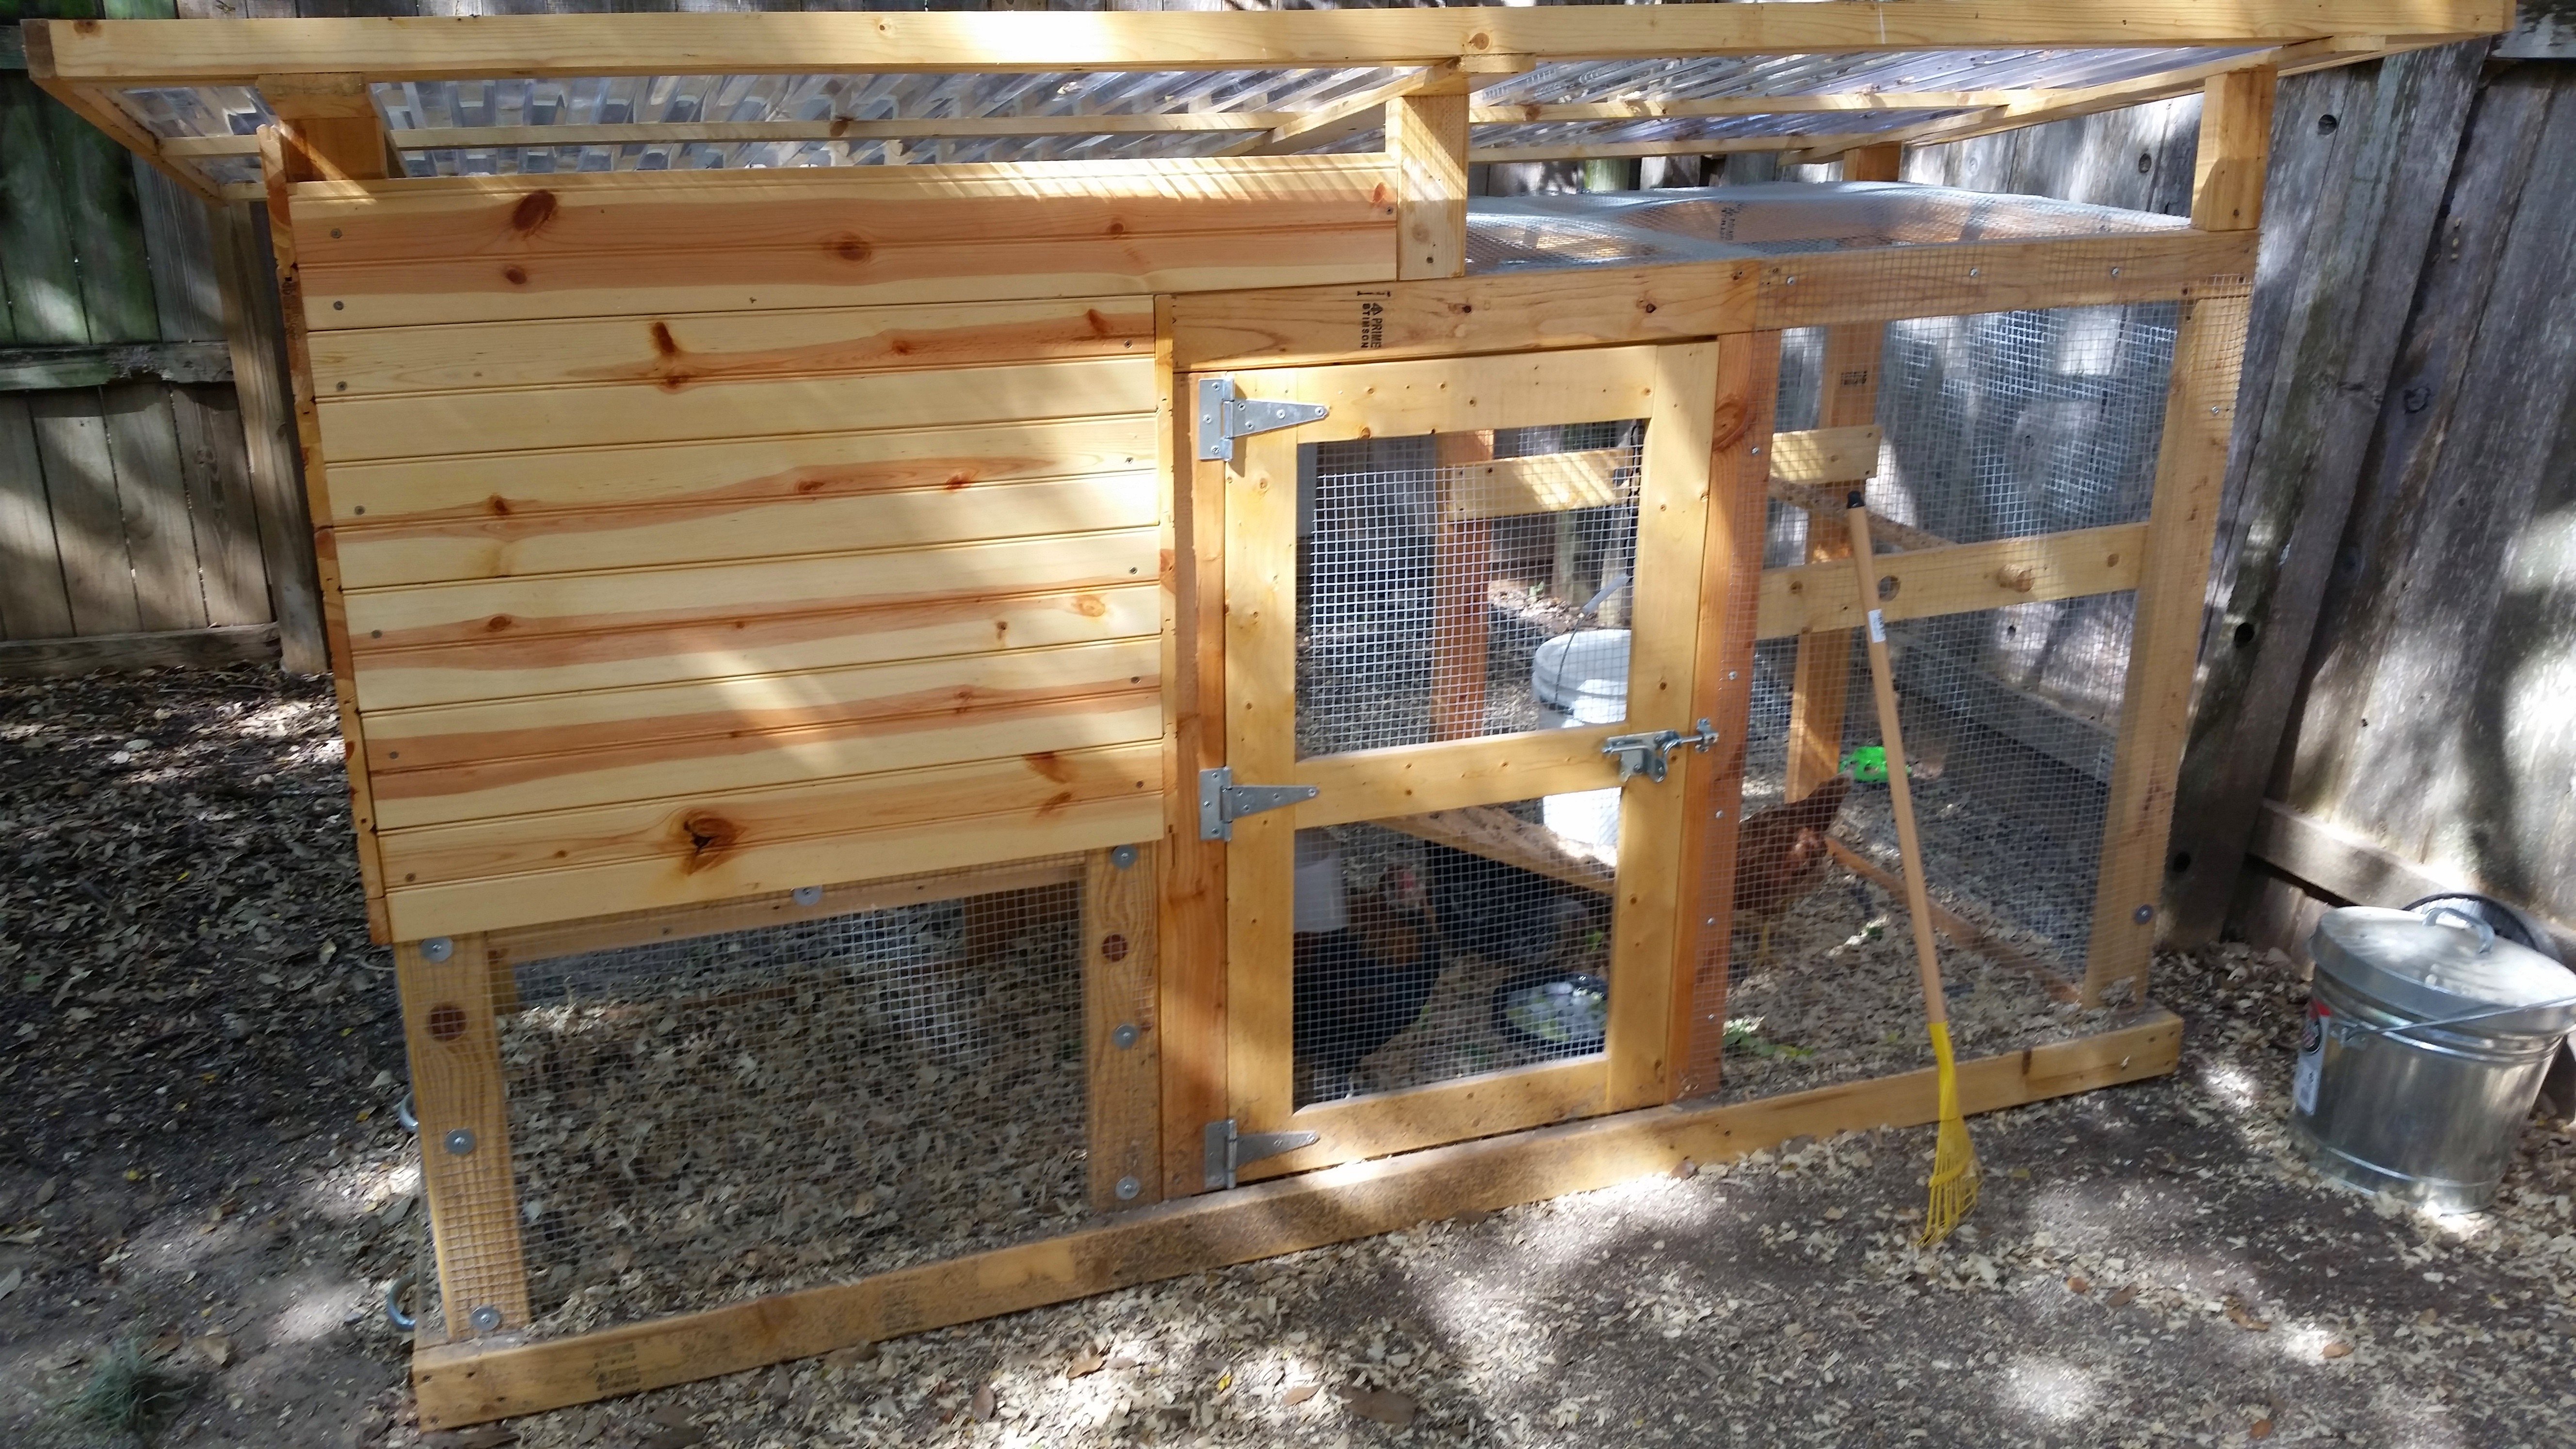 I get by with a little help from my friends.  Some very generous friends help me build this coop.  OK, well they mostly built it....but I helped!